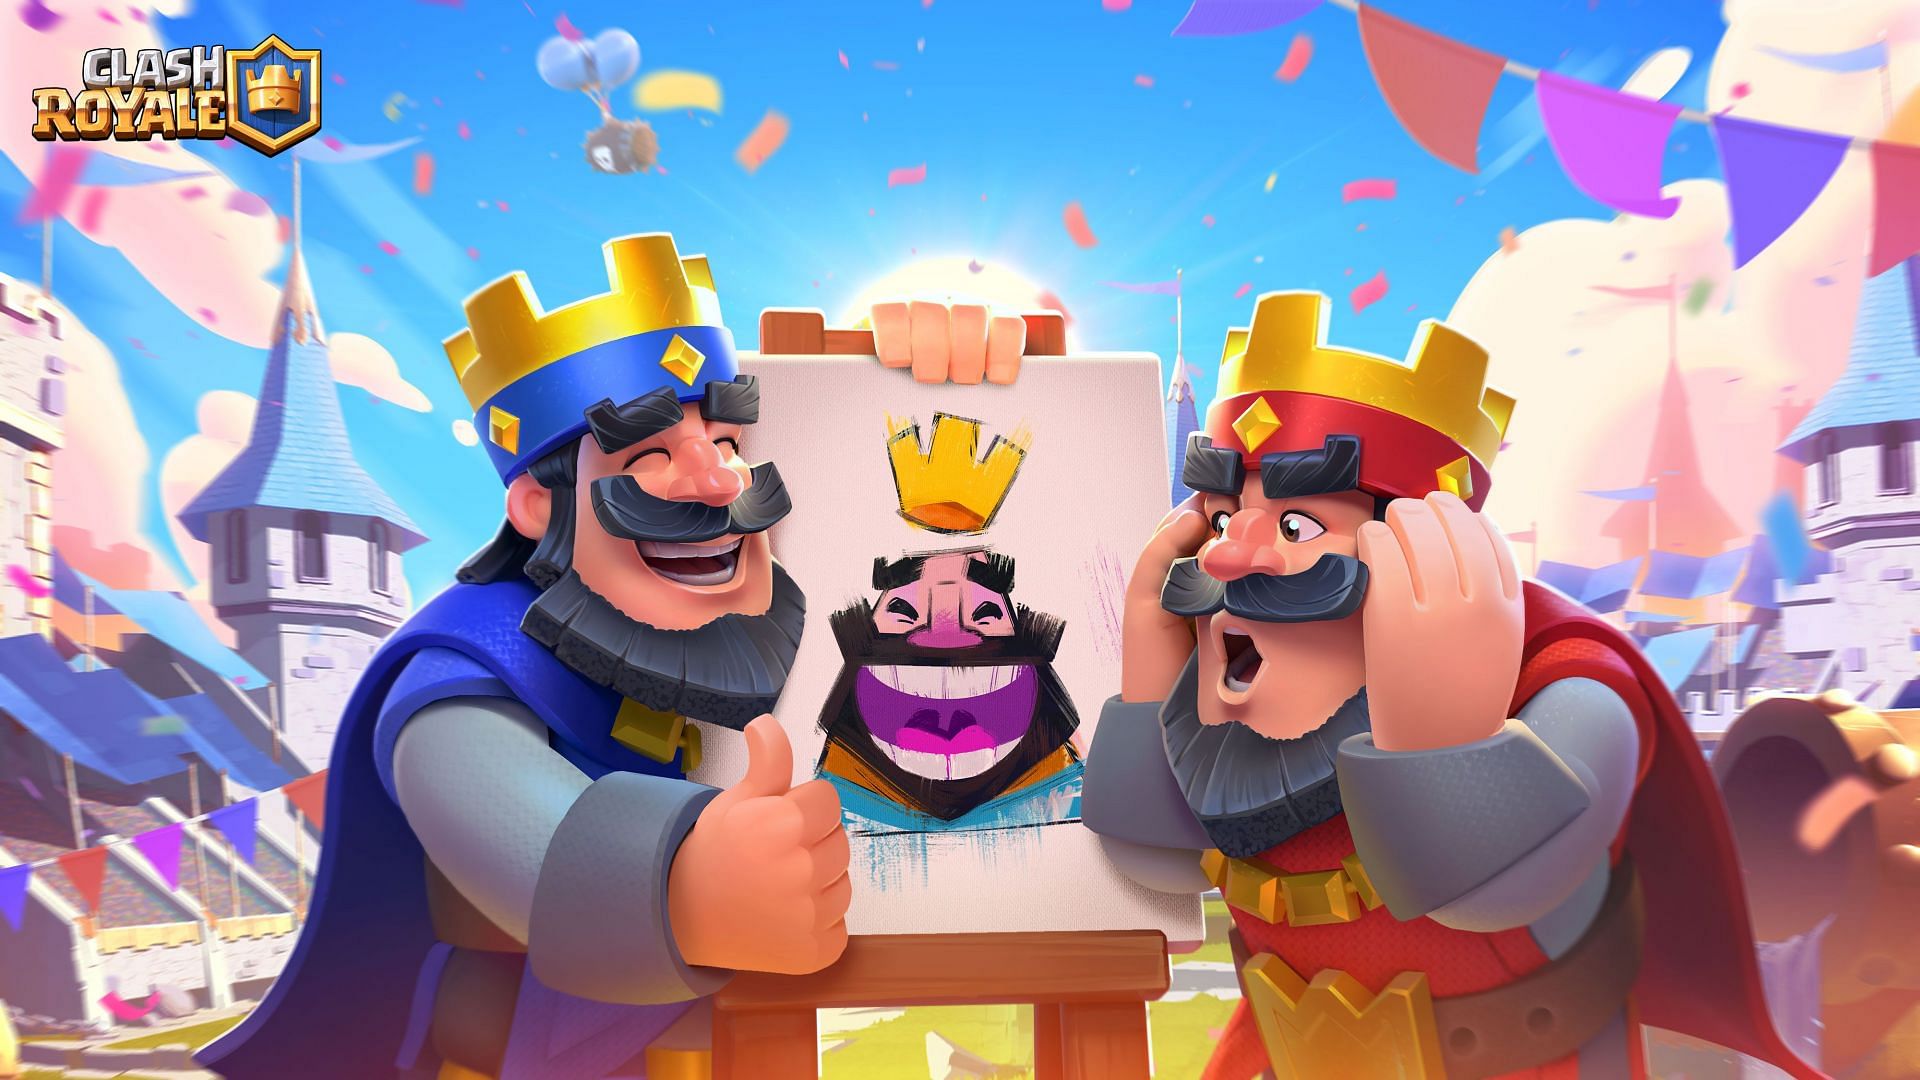 Tips to use Hunter in Clash Royale